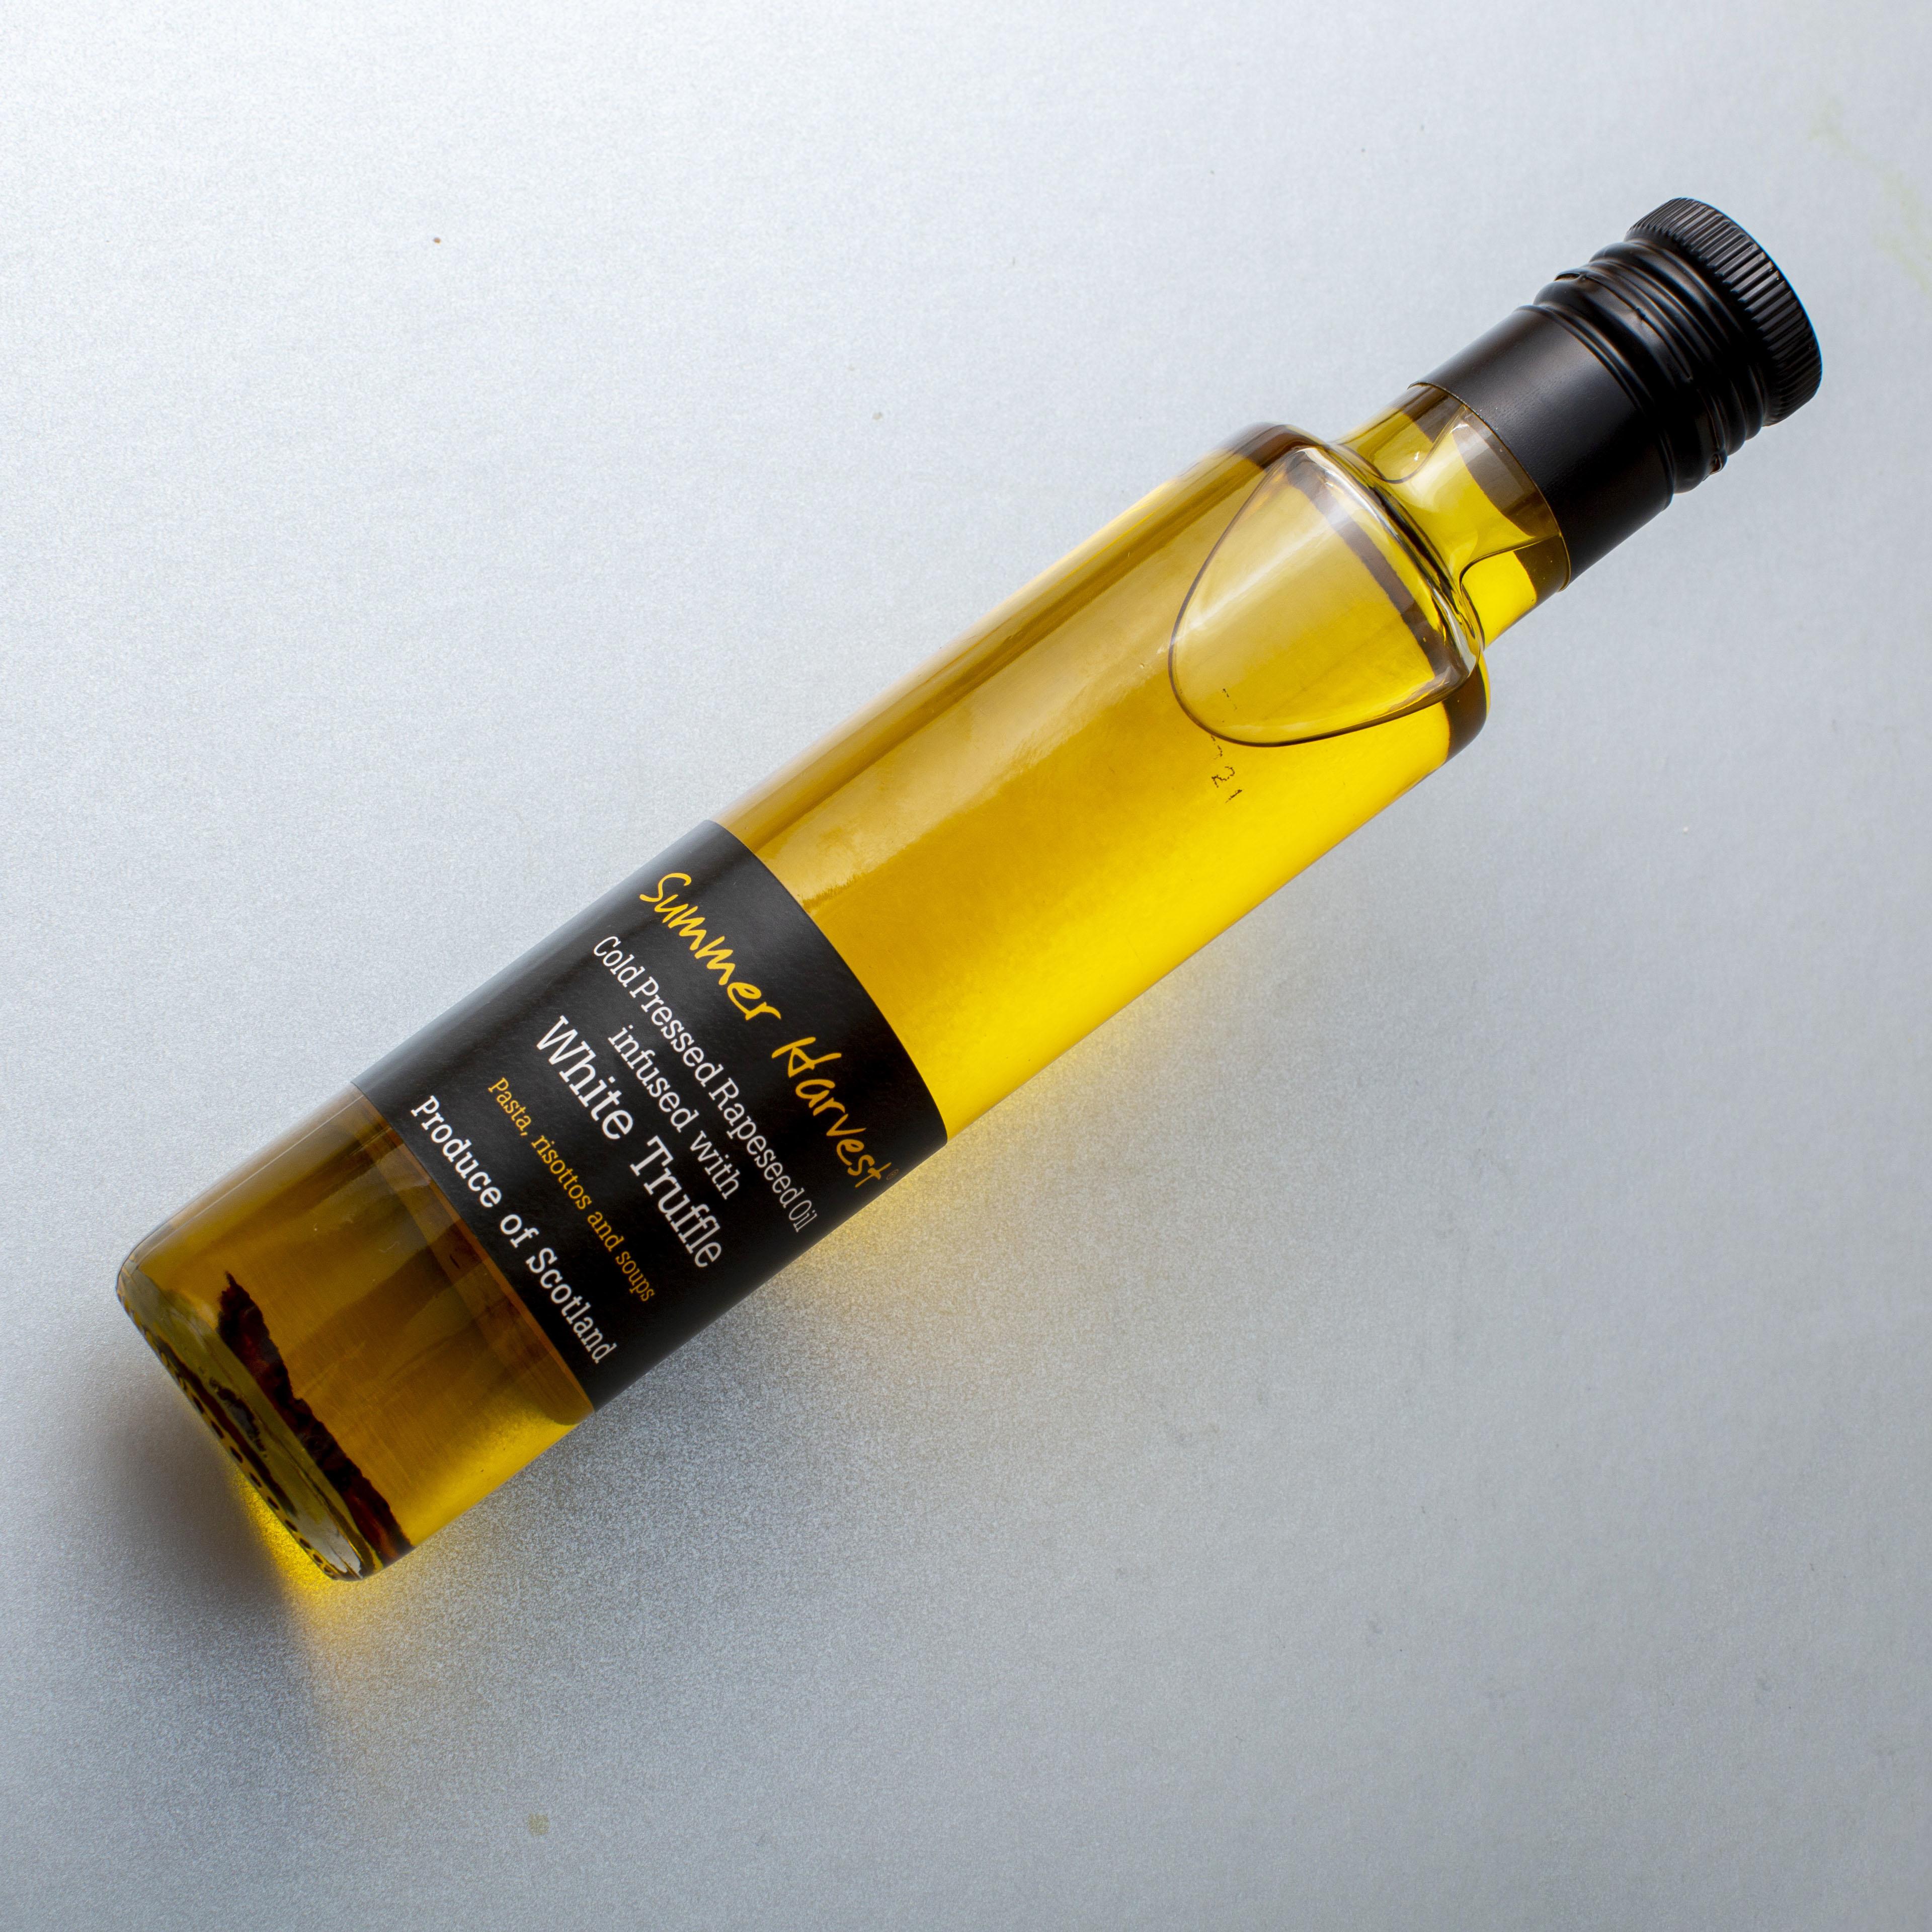 Summer Harvest Cold Pressed Rapeseed Oil infused with White Truffle